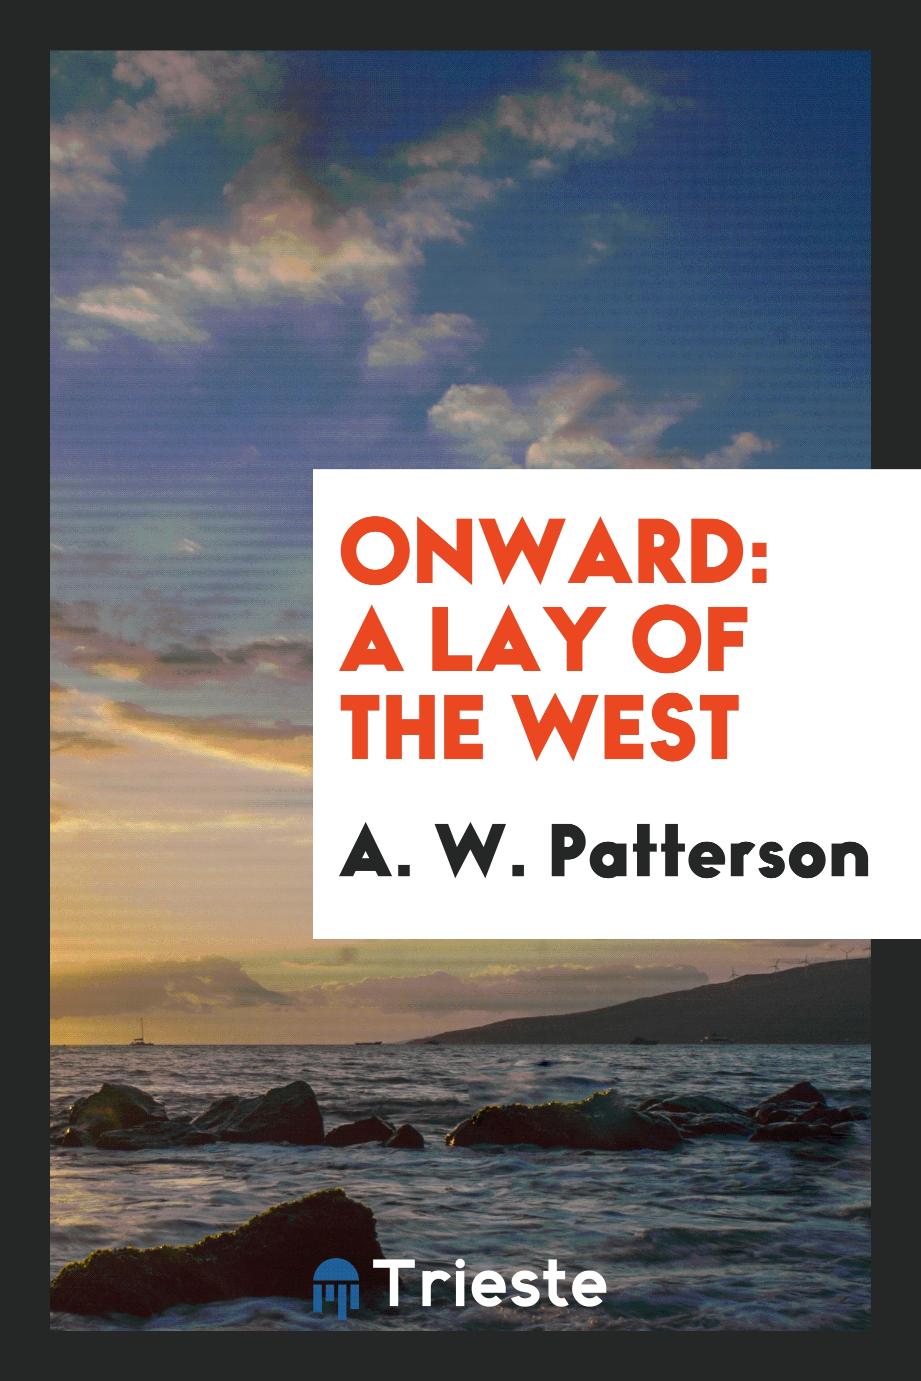 Onward: a lay of the West